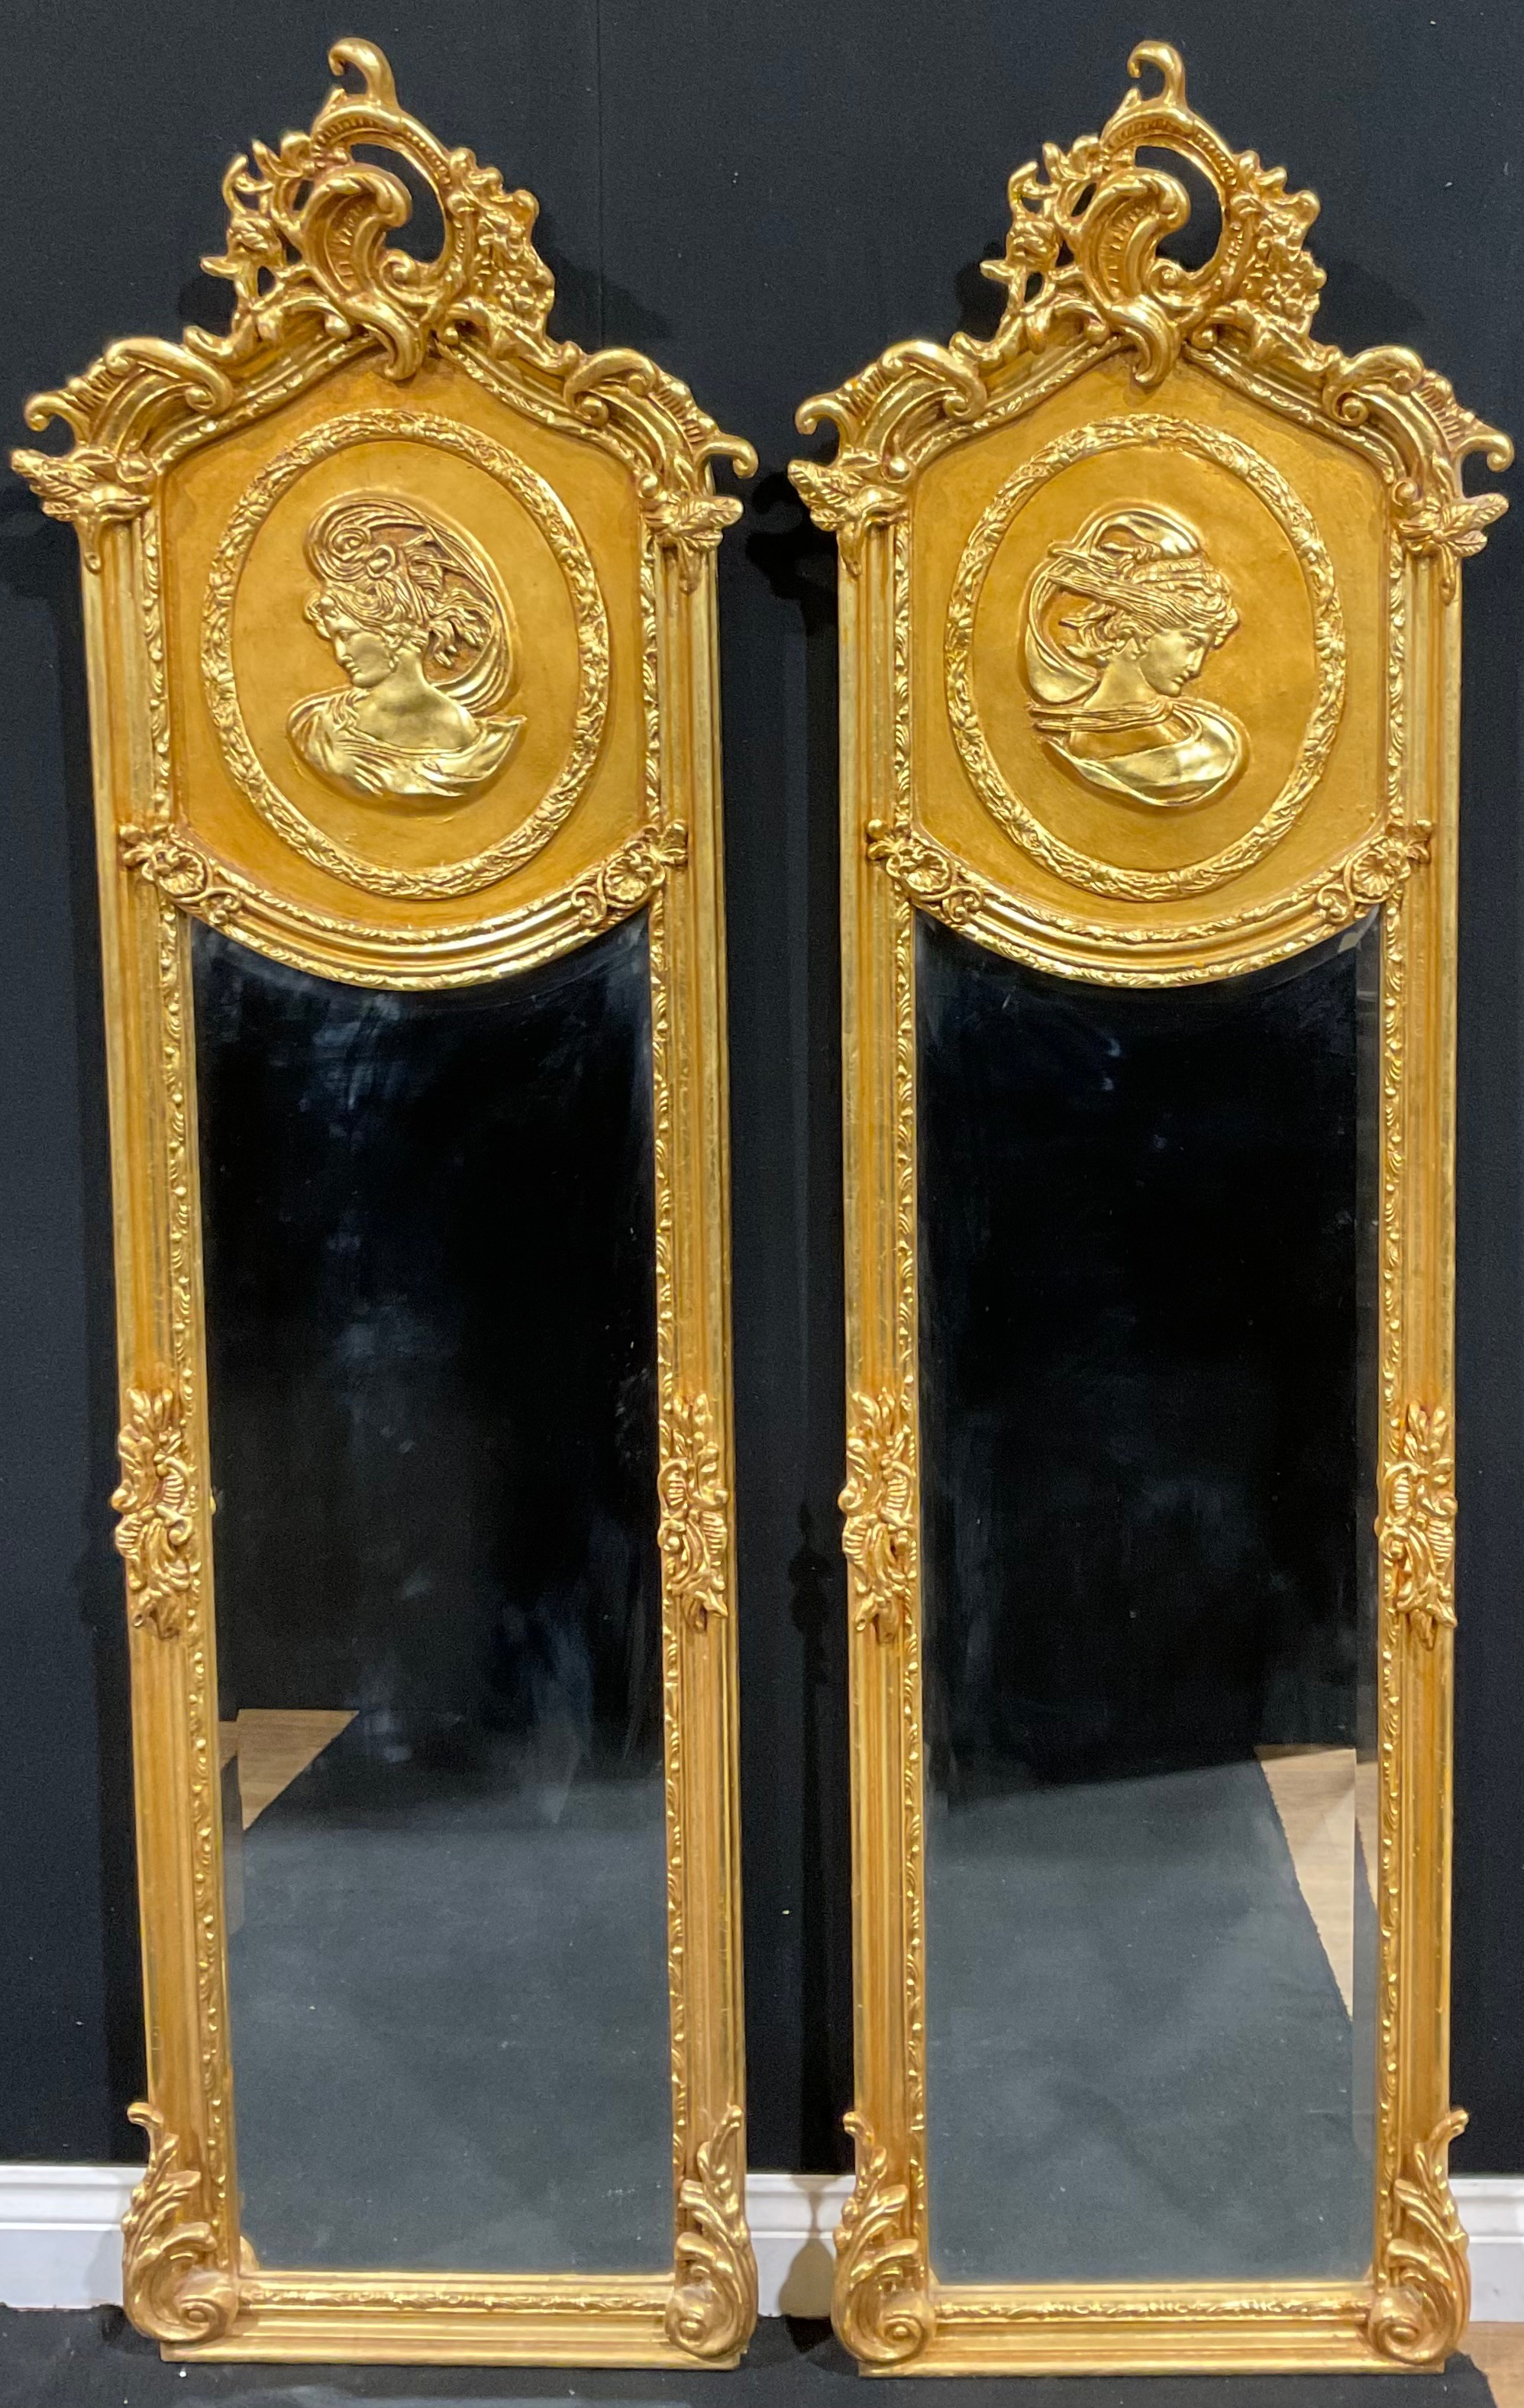 A pair of contemporary Italian Baroque style gilt wall hanging mirrors, each with interlaced foliate